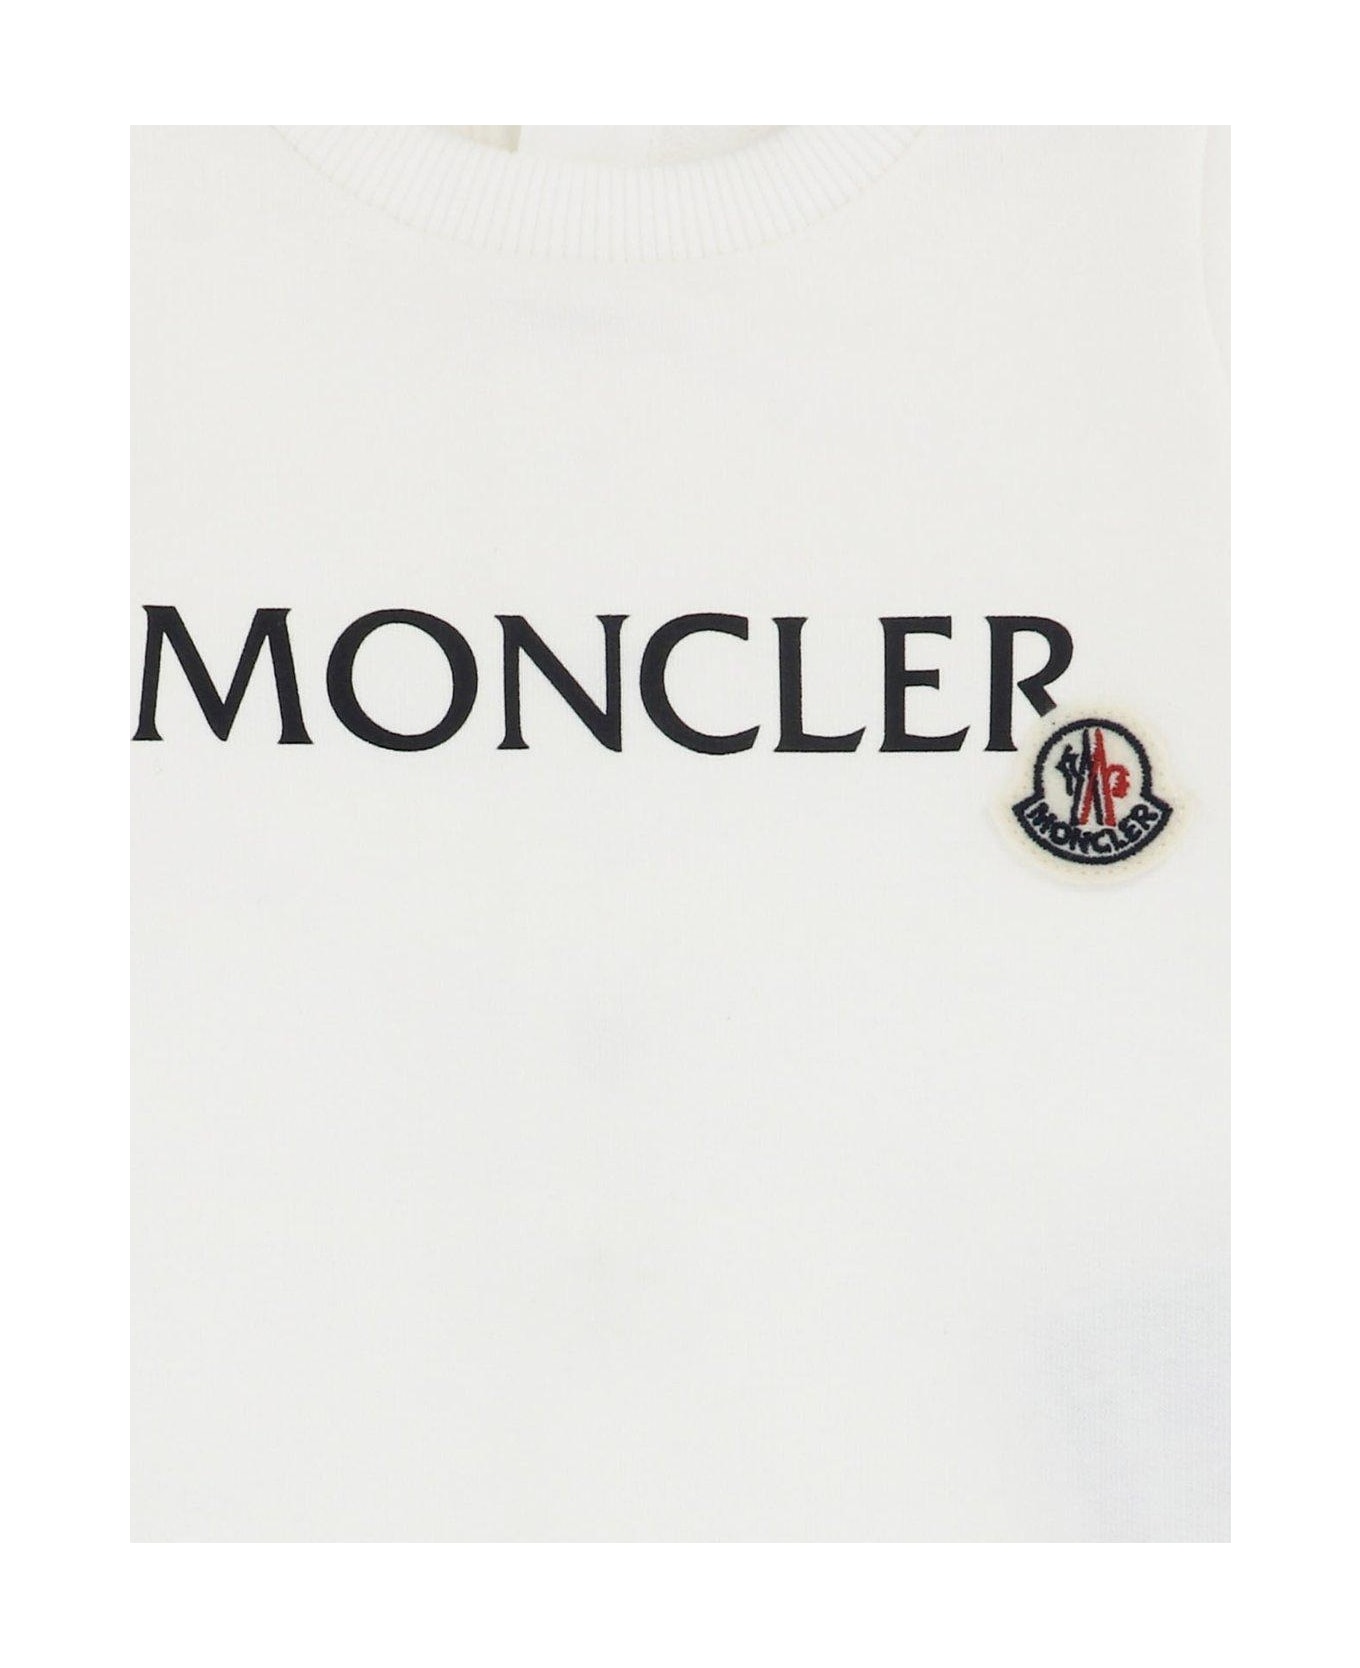 Moncler Logo-printed Long Sleeved Rompers - White